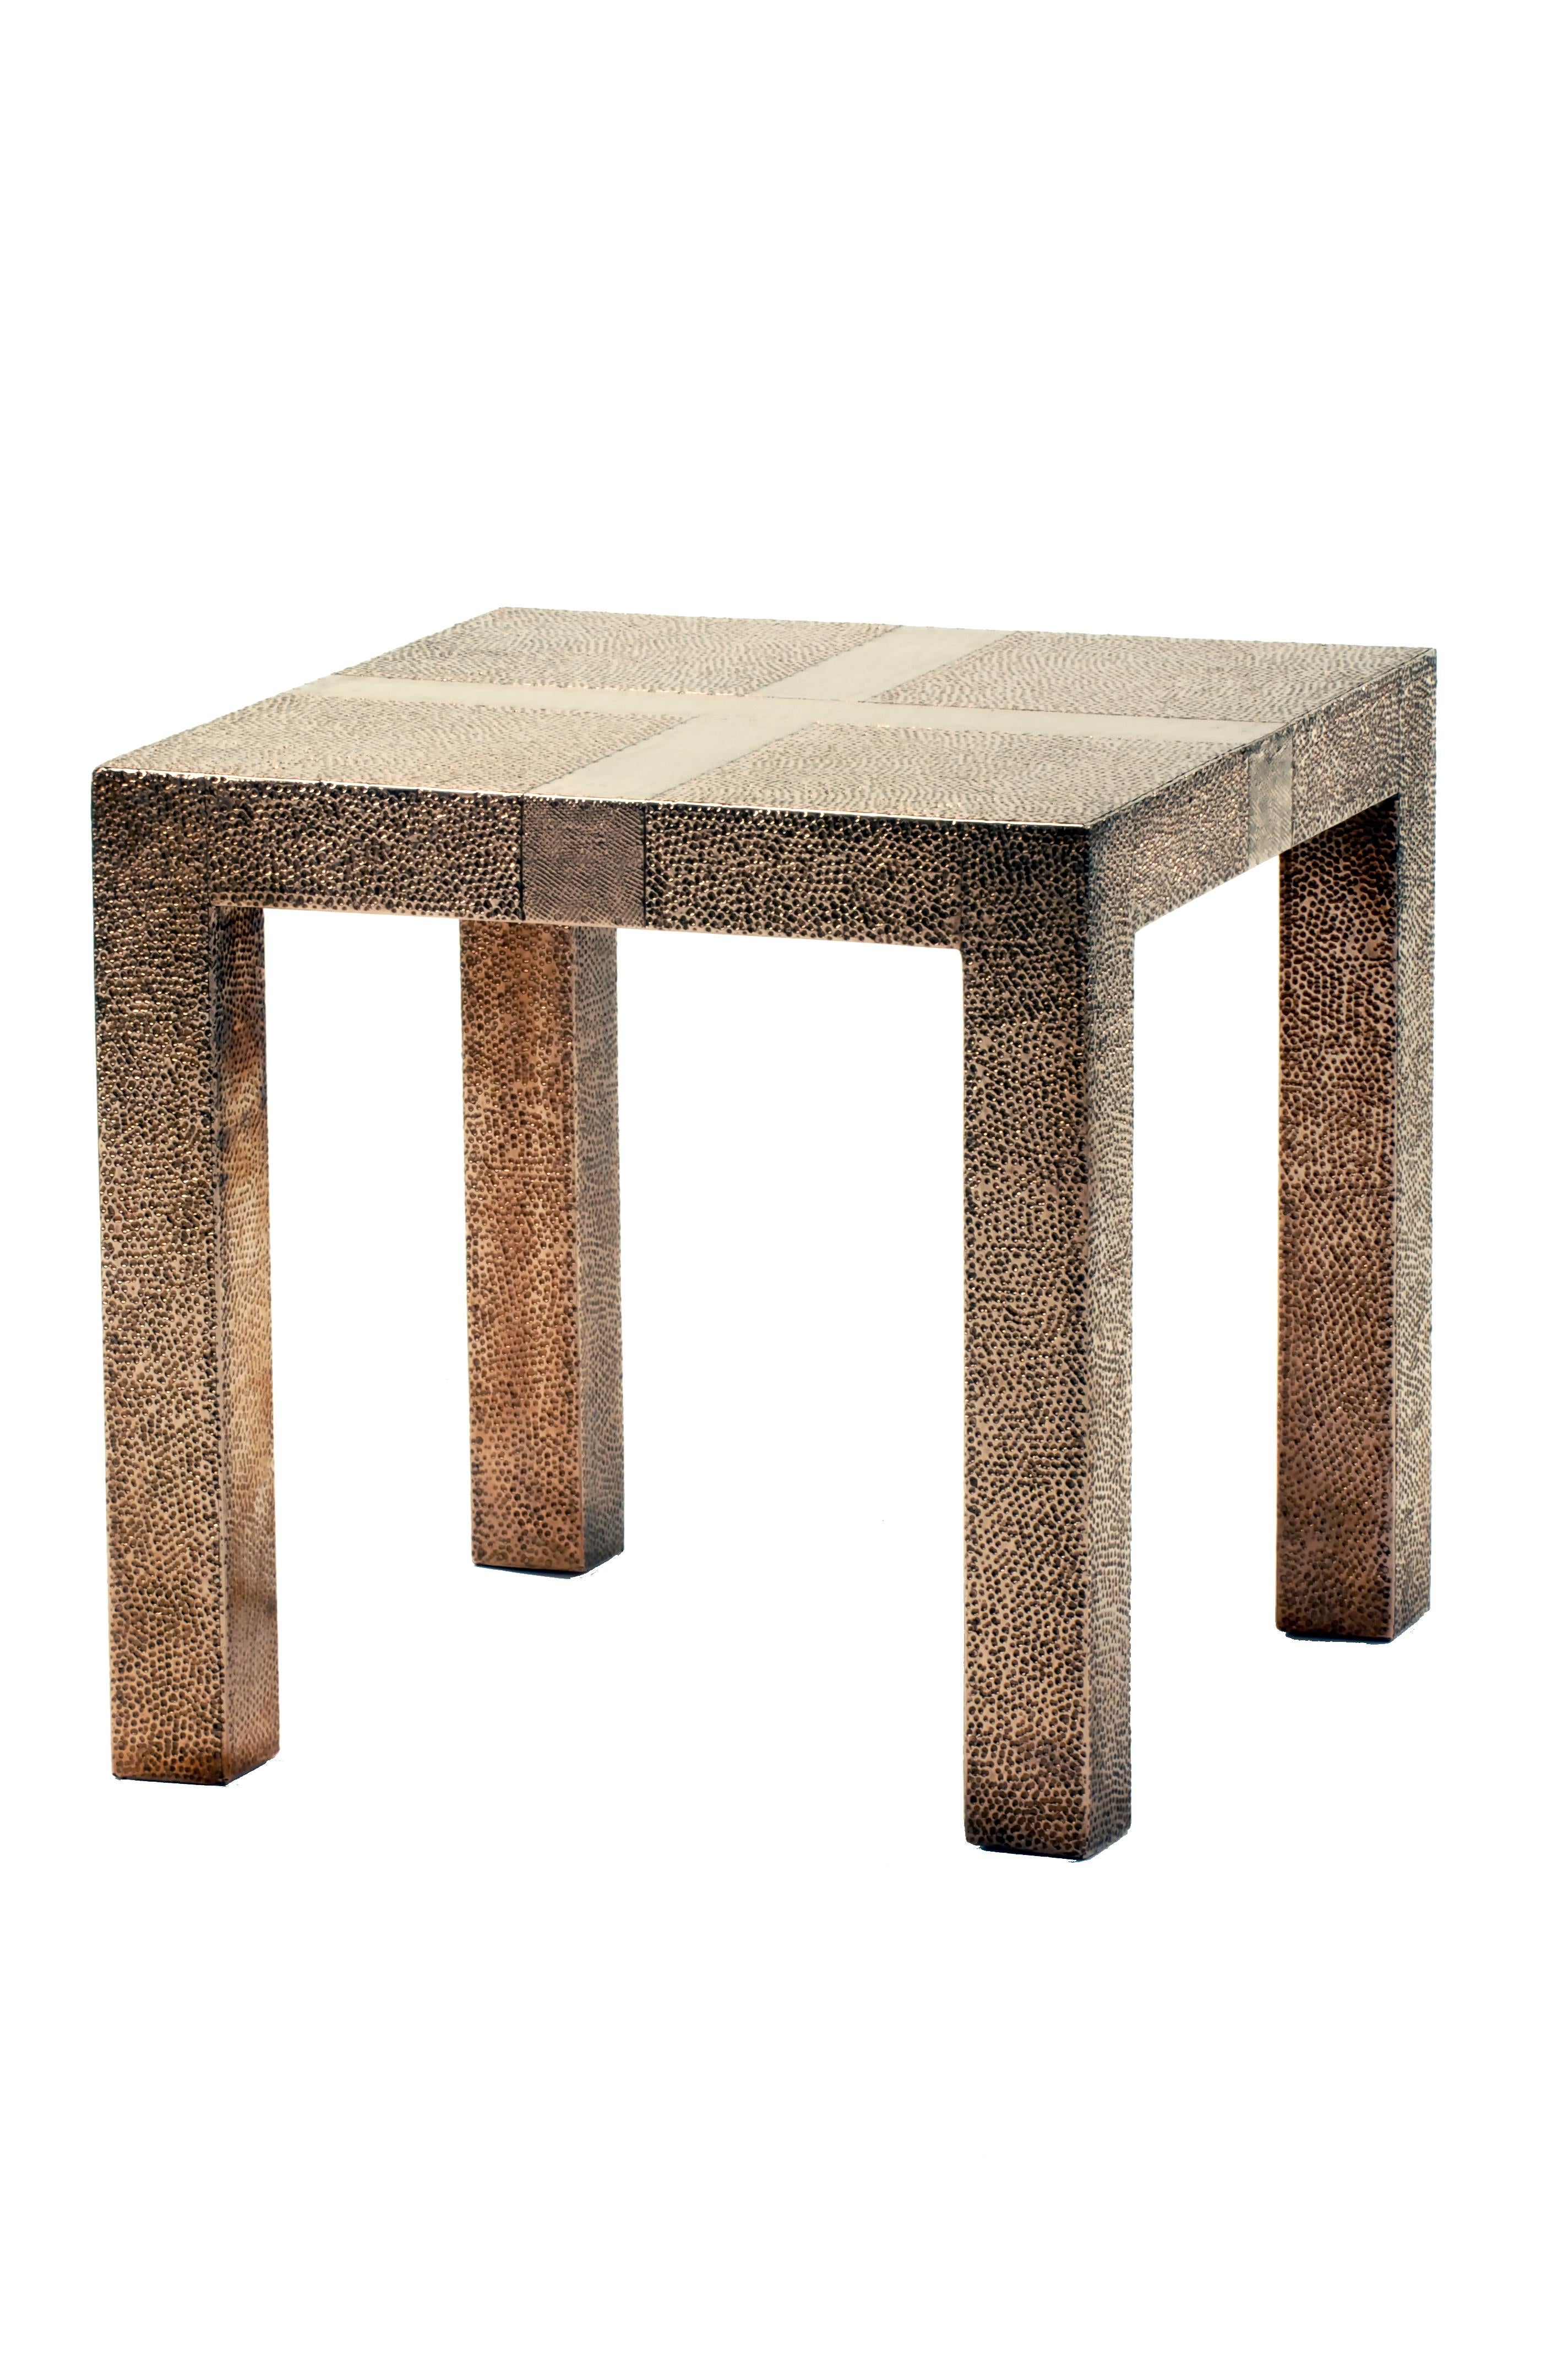 Hand-Carved Square Drink Table Metal Clad Over MDF Handcrafted in India by Alison Spear For Sale